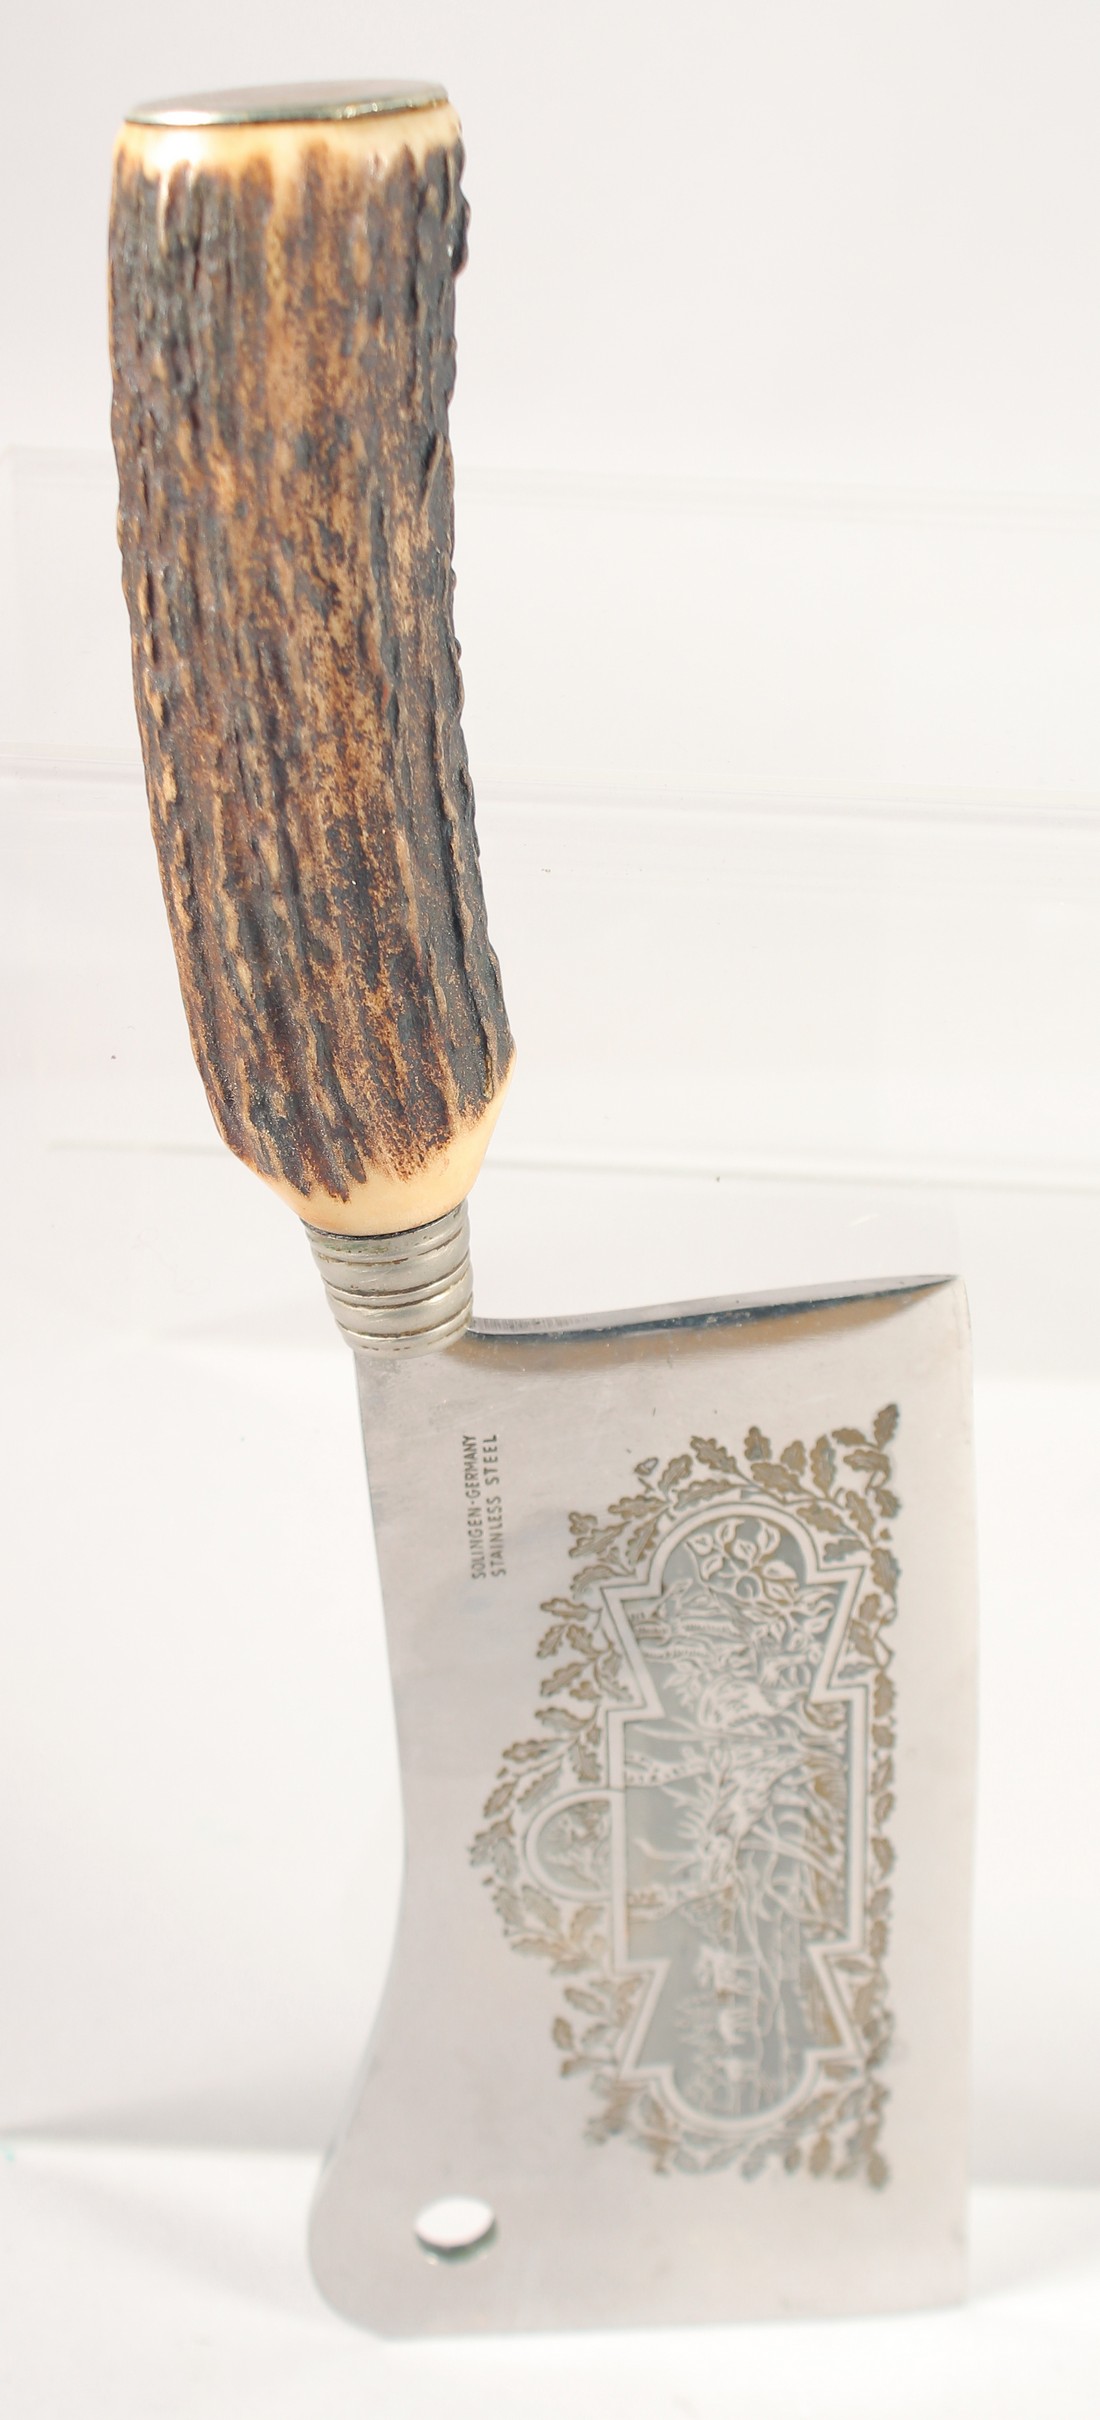 A SOLINGEN STAINLESS STEAL CLEAVER, the blade engraved with a deer, with an antler handle, 10.5"